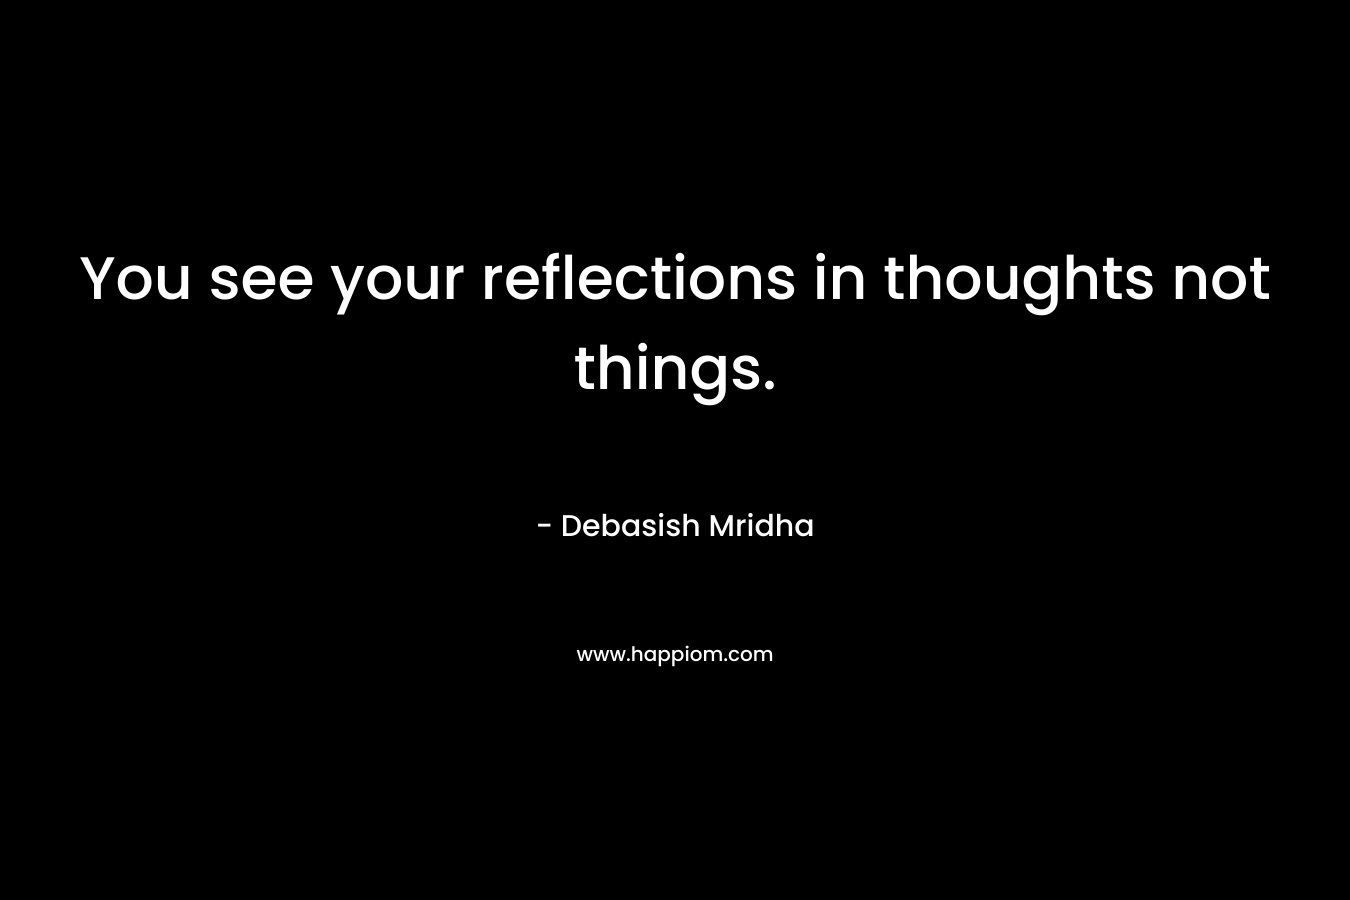 You see your reflections in thoughts not things.